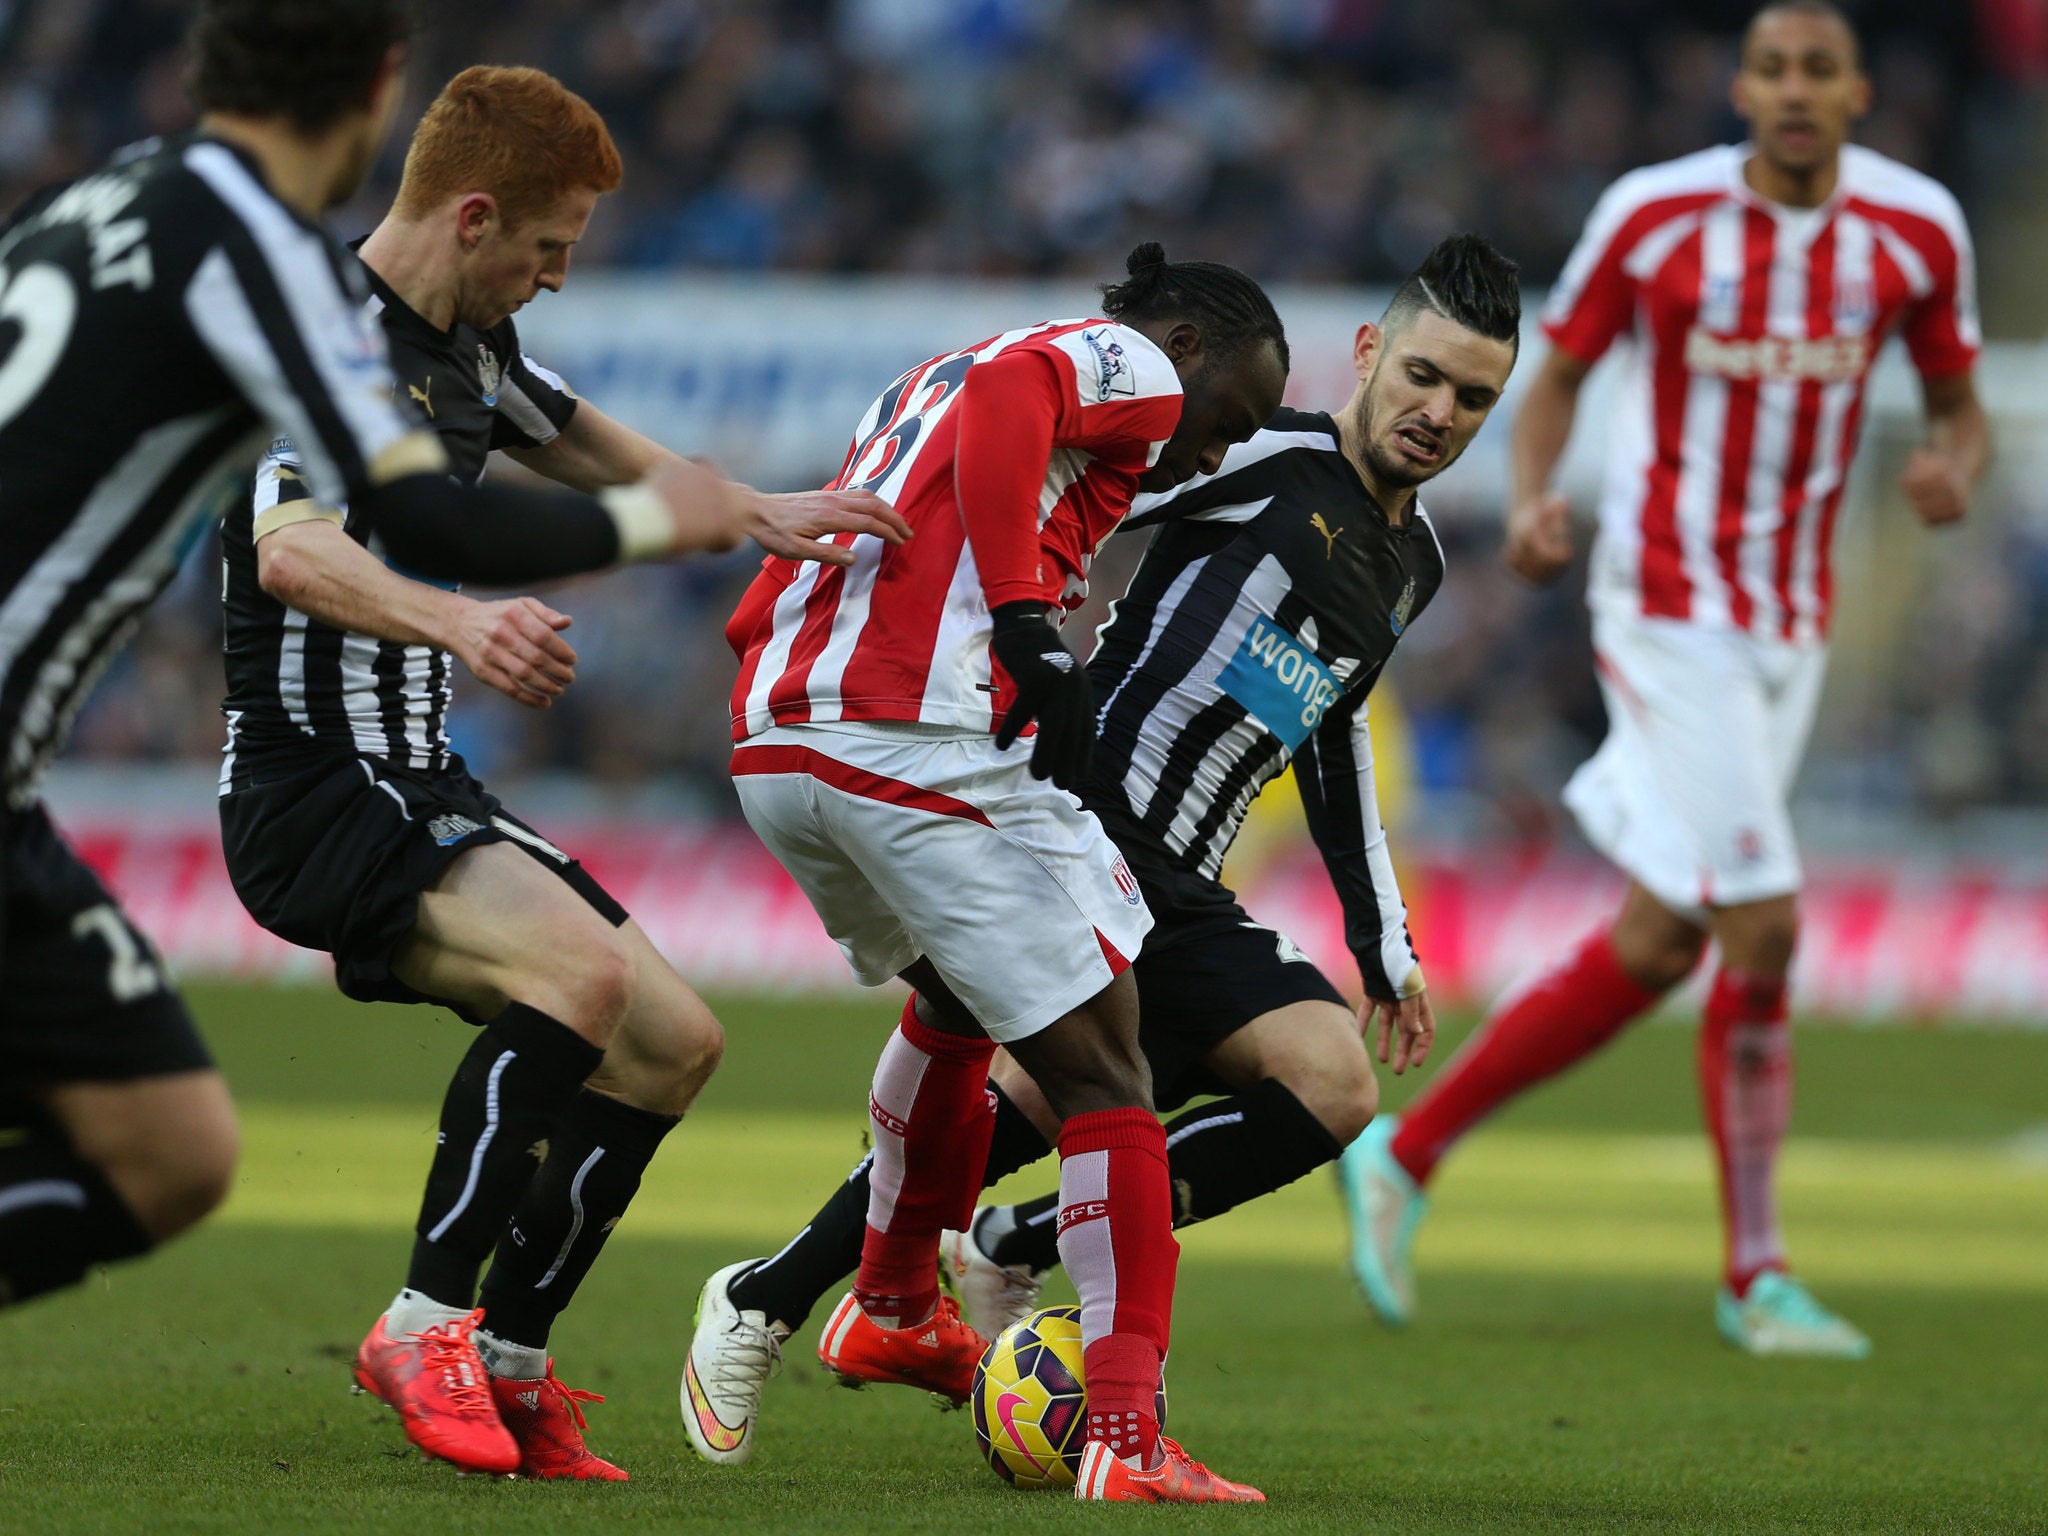 Jack Colback, on a yellow card, fouls Victor Moses